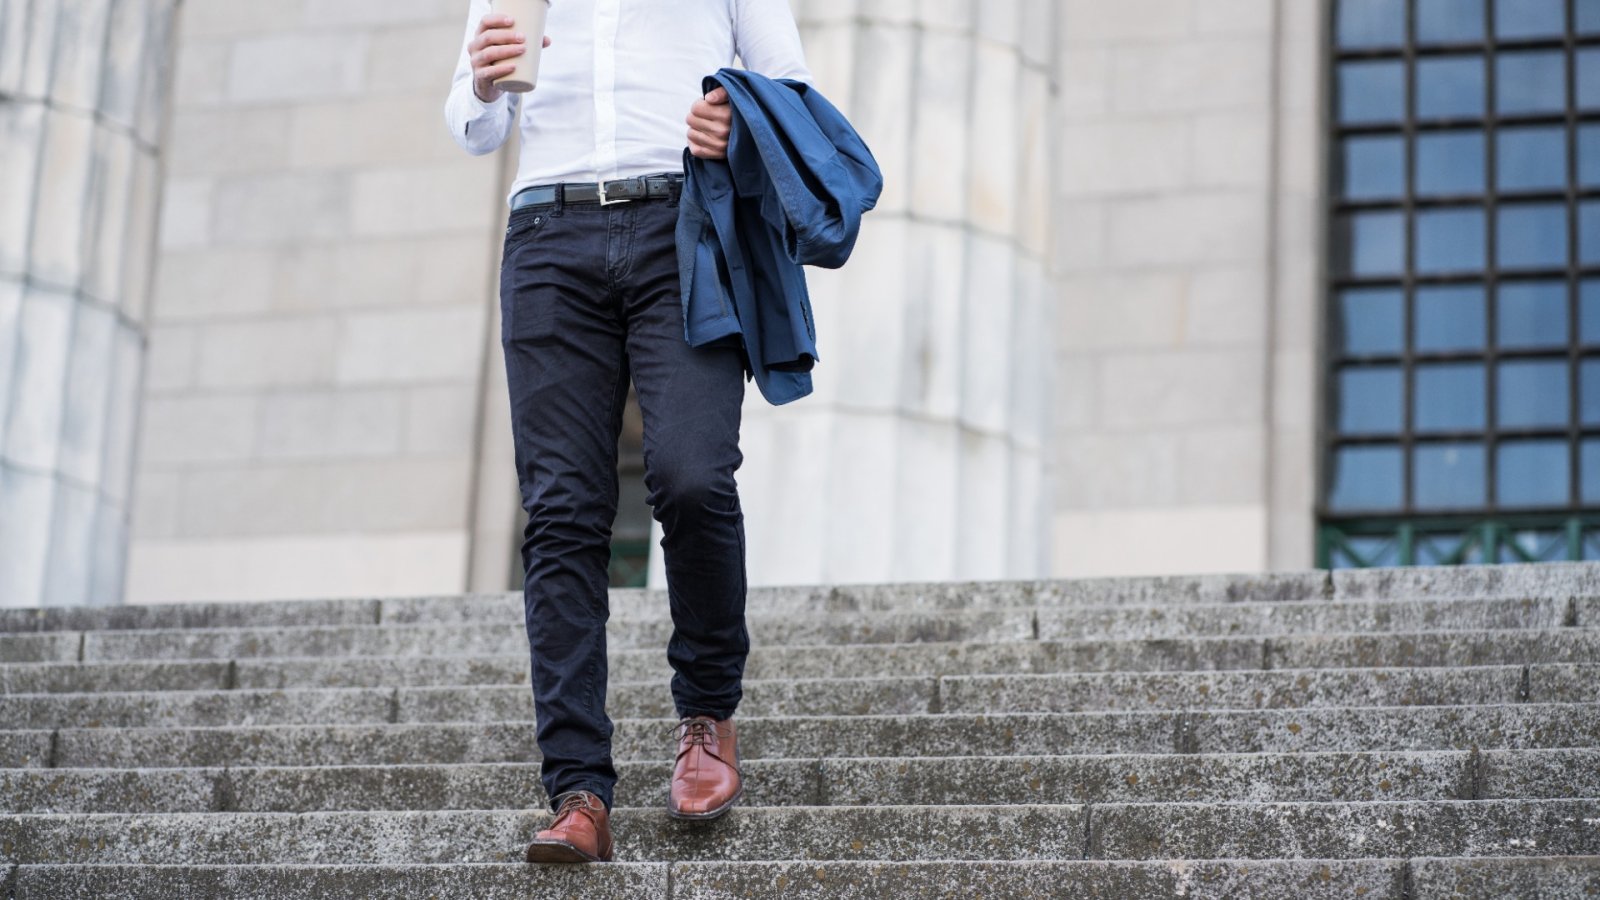 Your guide to business casual attire: key dress code styles to know